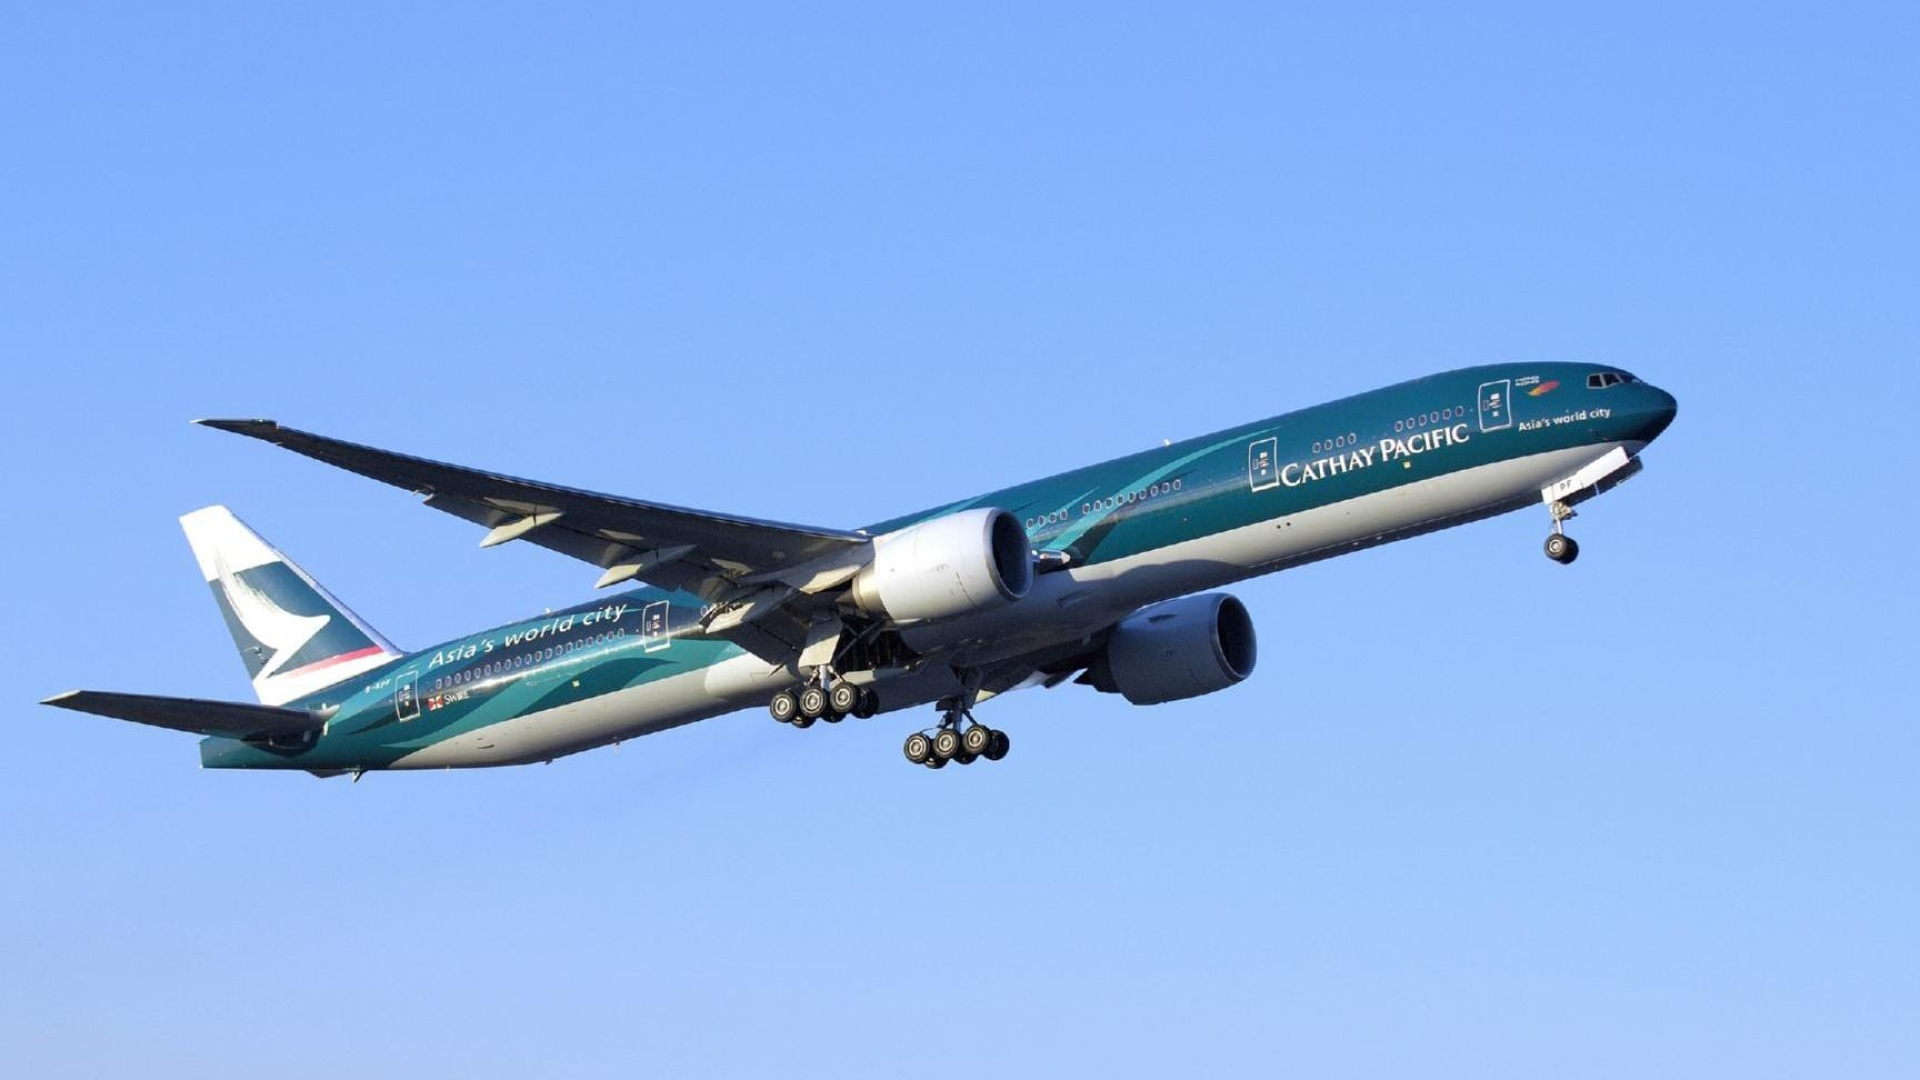 Cathay Pacific, Boeing 777, Aircraft wallpapers, Aviation photography, 1920x1080 Full HD Desktop